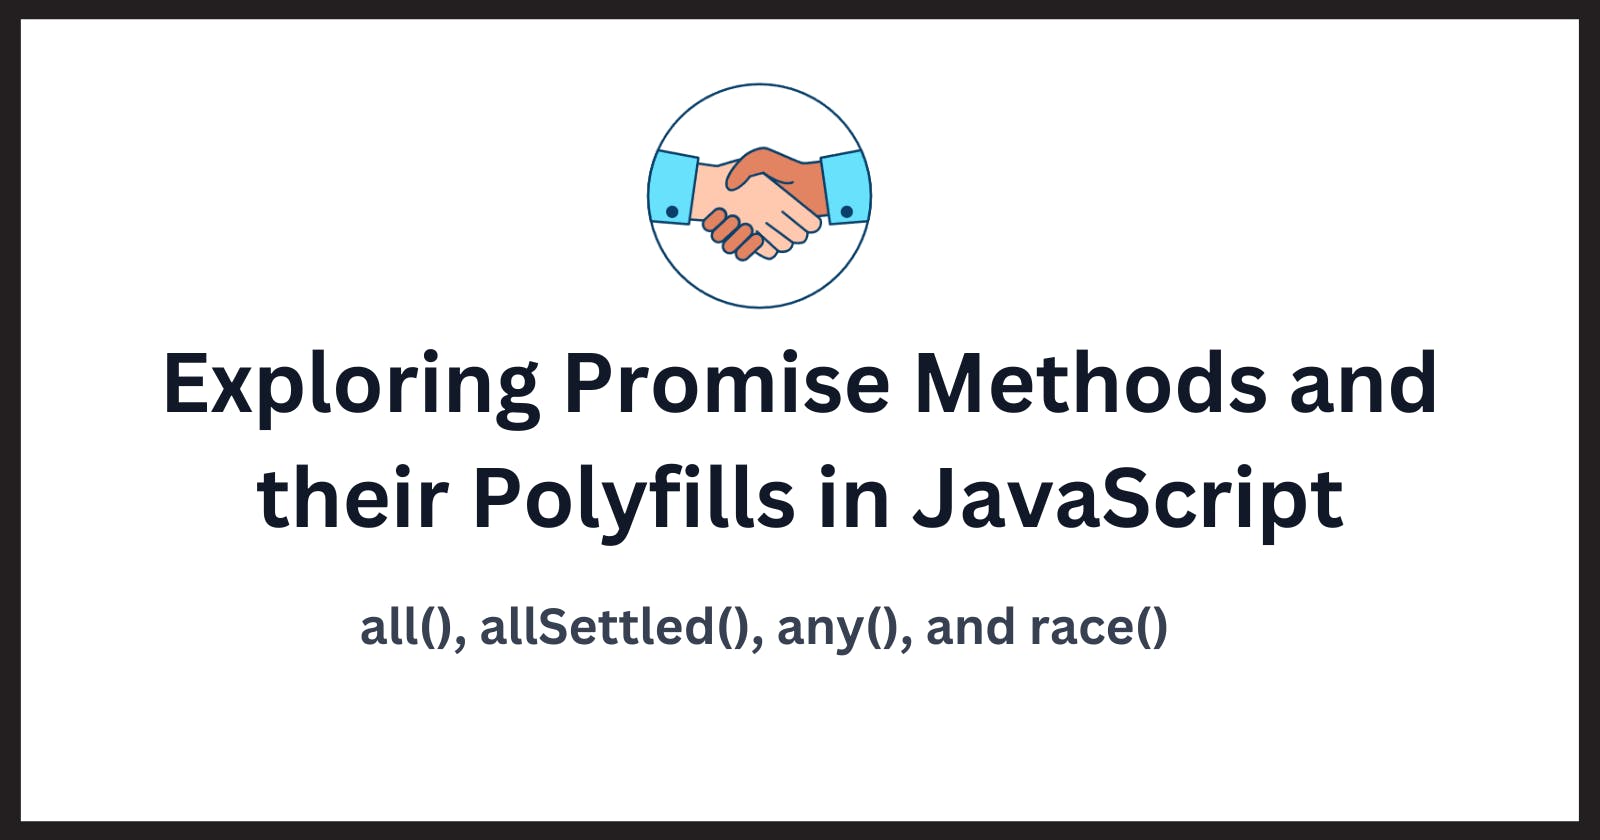 Exploring Promise Methods and their Polyfills in JavaScript: all(), any(), allSettled() and race()